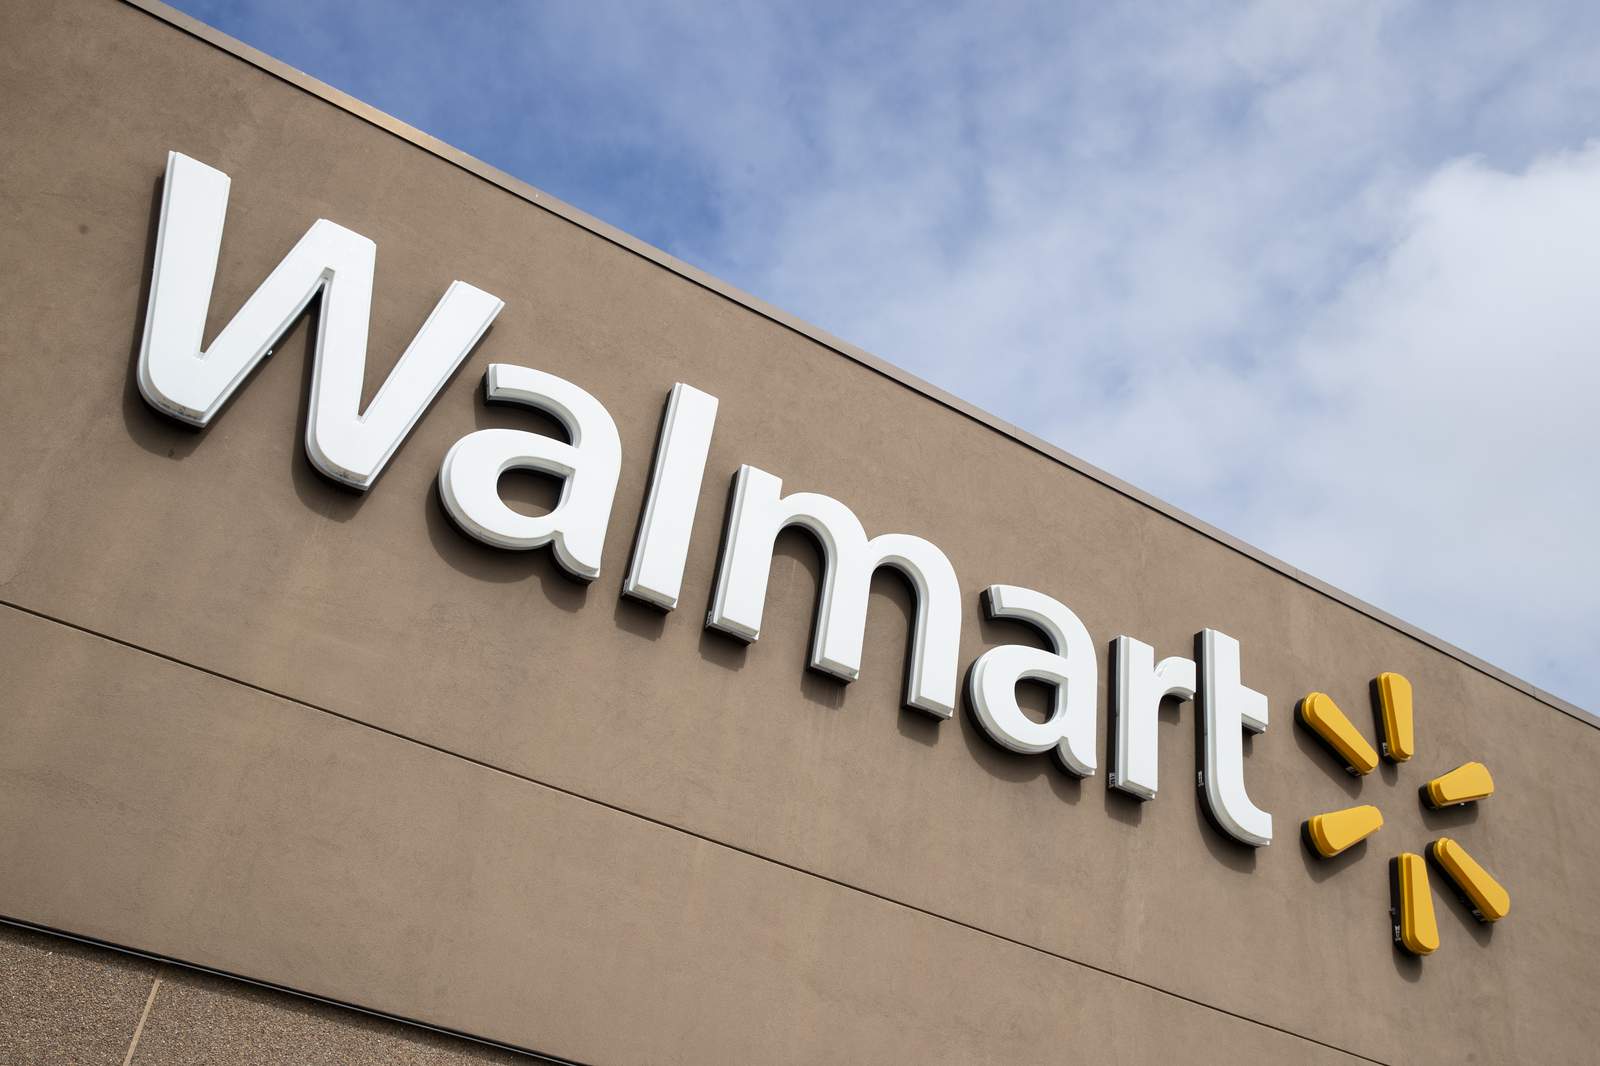 Walmart+ launches in Texas with free deliveries, mobile checkout, gas discounts